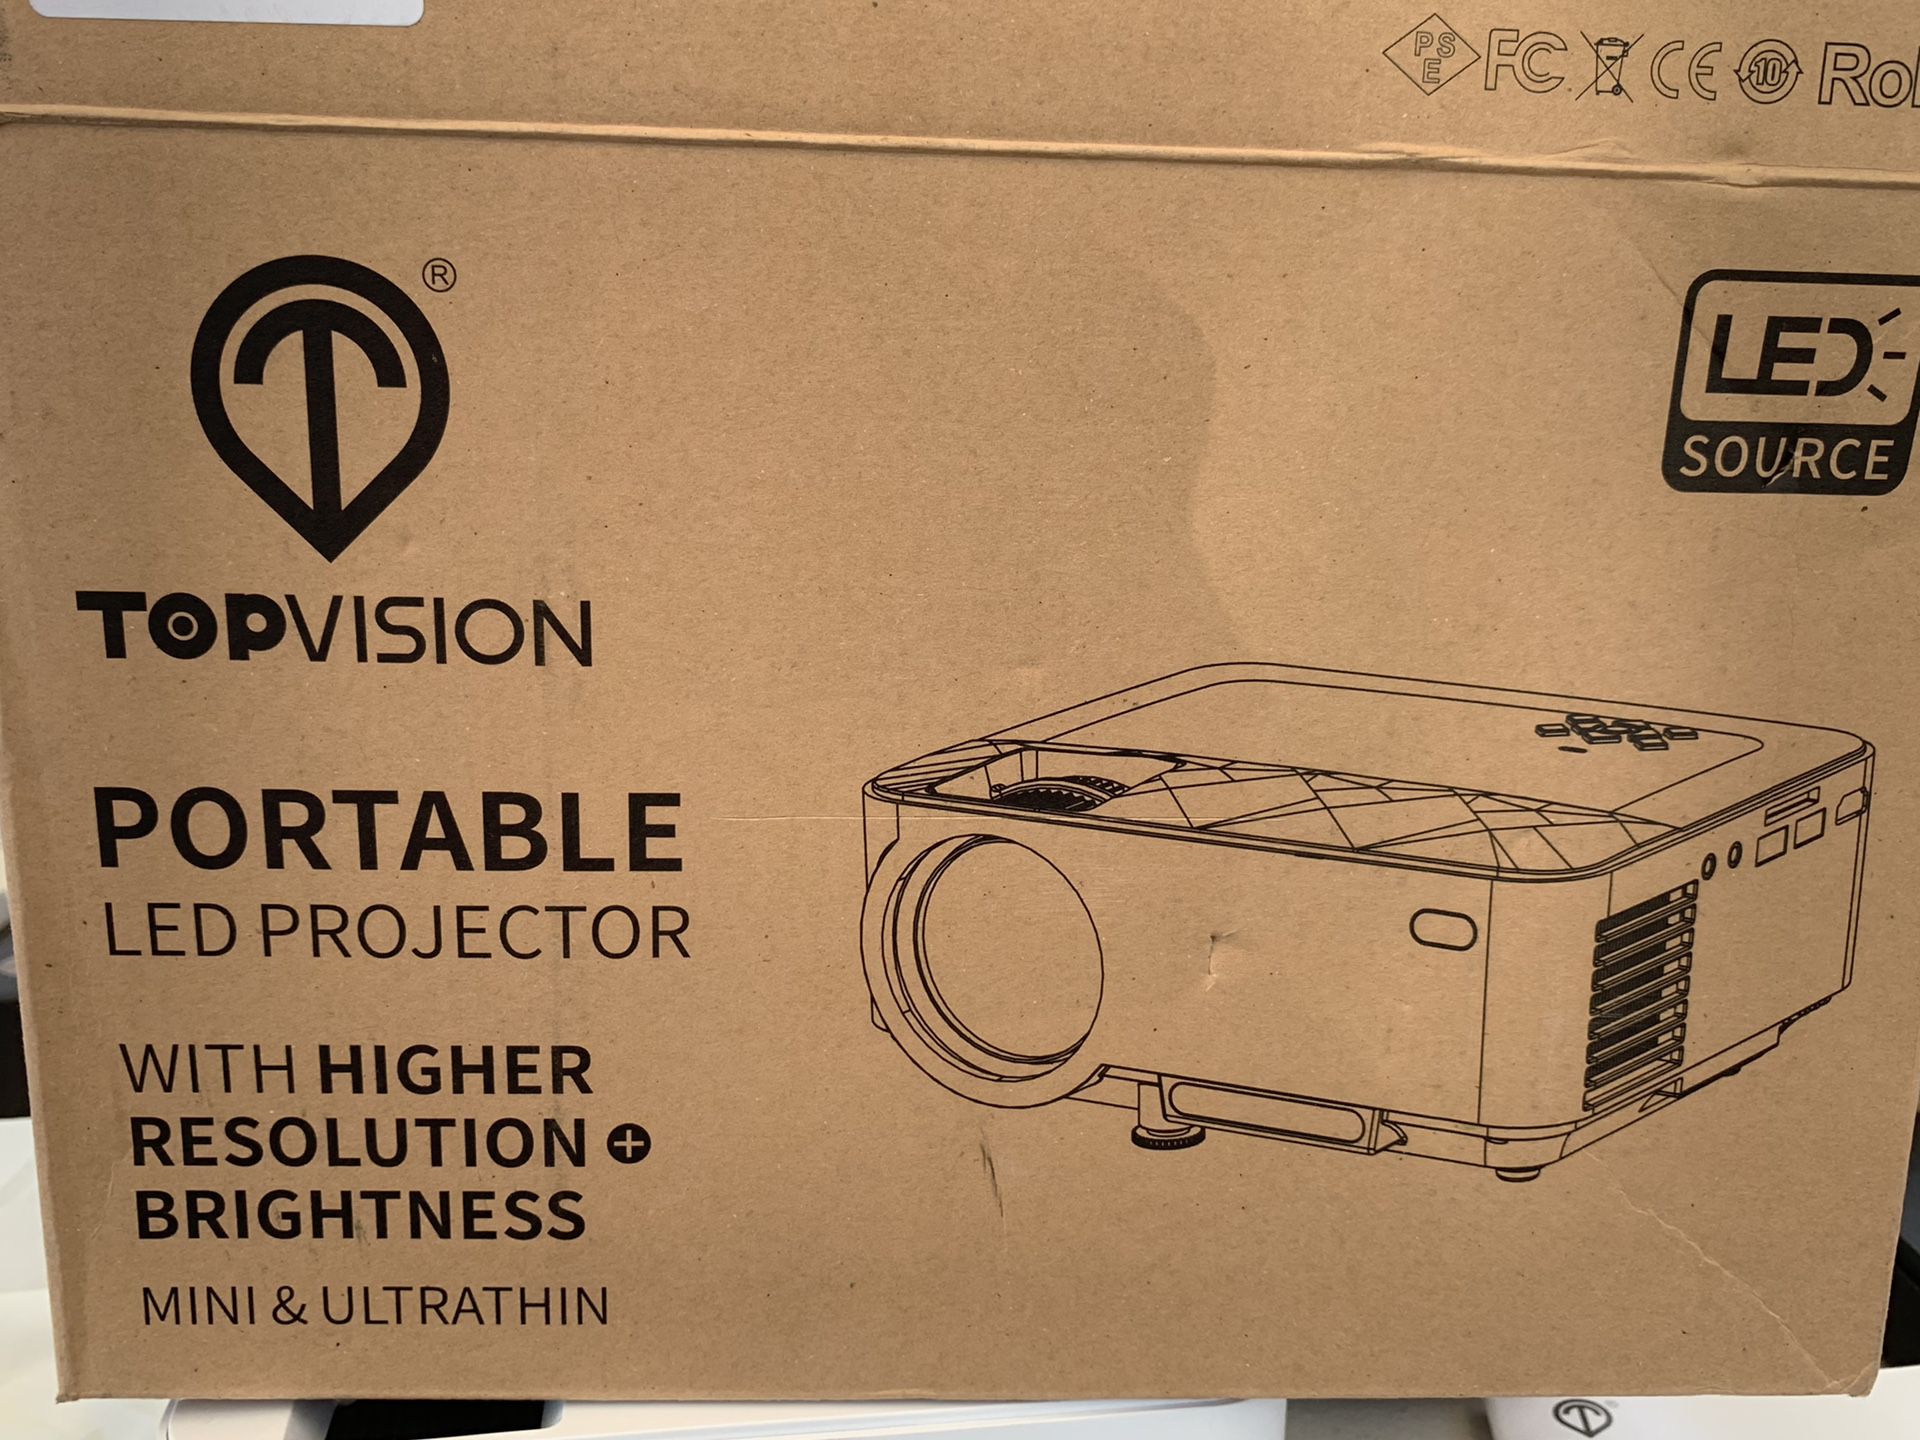 TOPVISION led projector